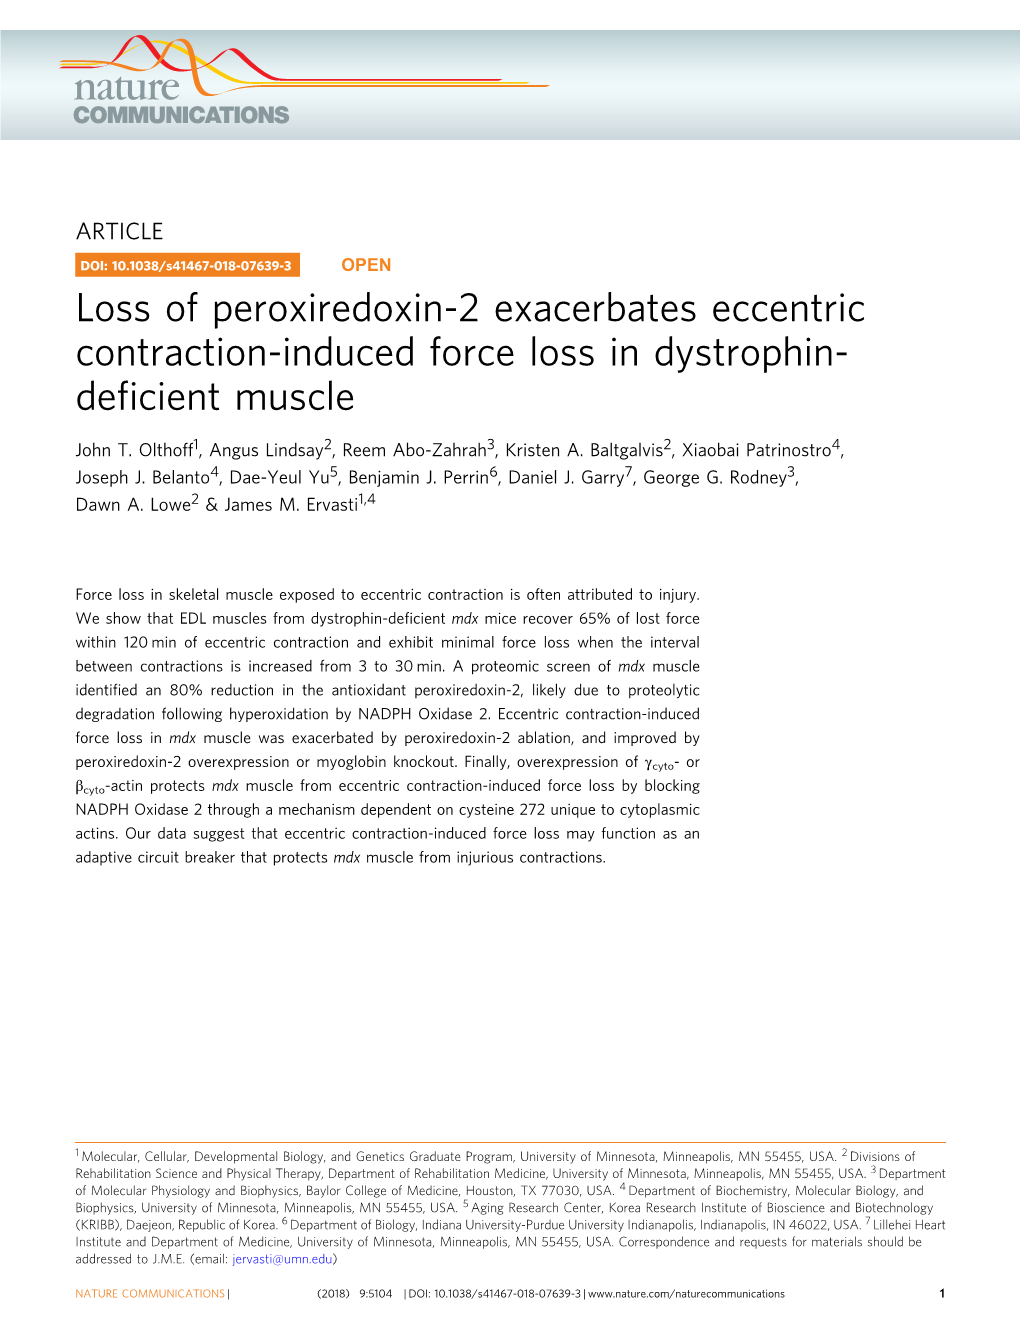 Loss of Peroxiredoxin-2 Exacerbates Eccentric Contraction-Induced Force Loss in Dystrophin- Deﬁcient Muscle